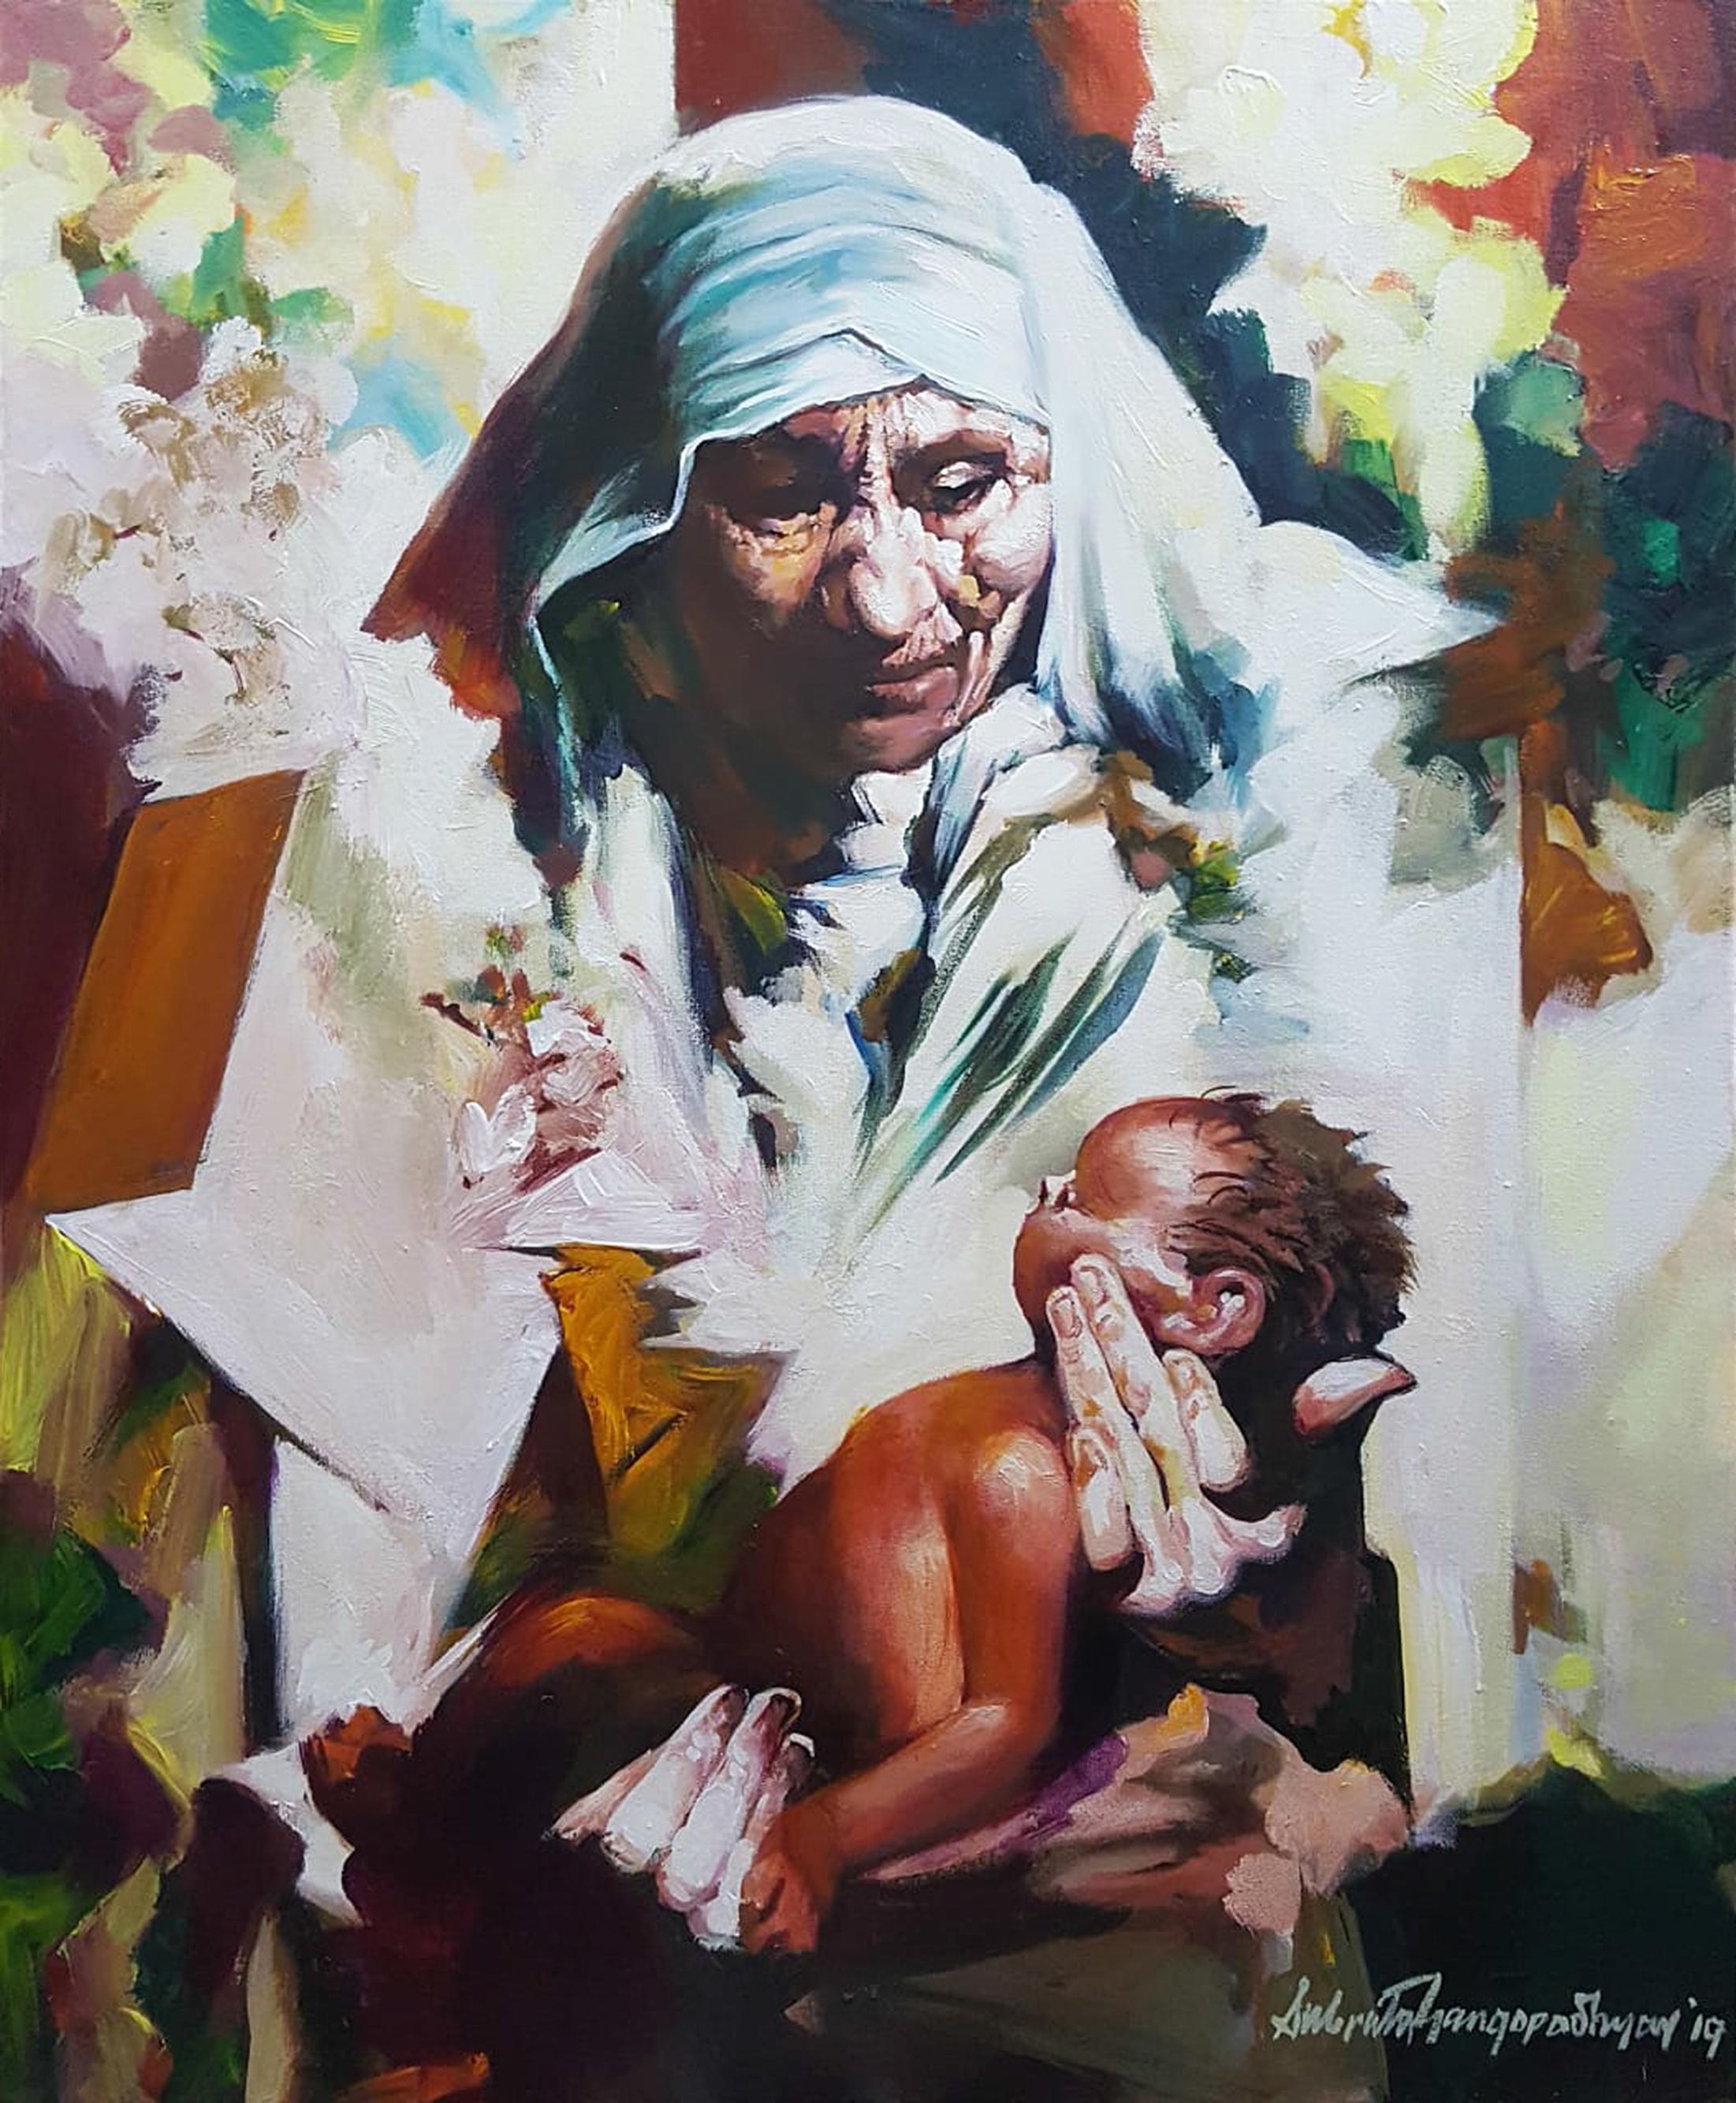 Mother & Child, Mother Teresa, Acrylic on Canvas by Indian Artist "In Stock"